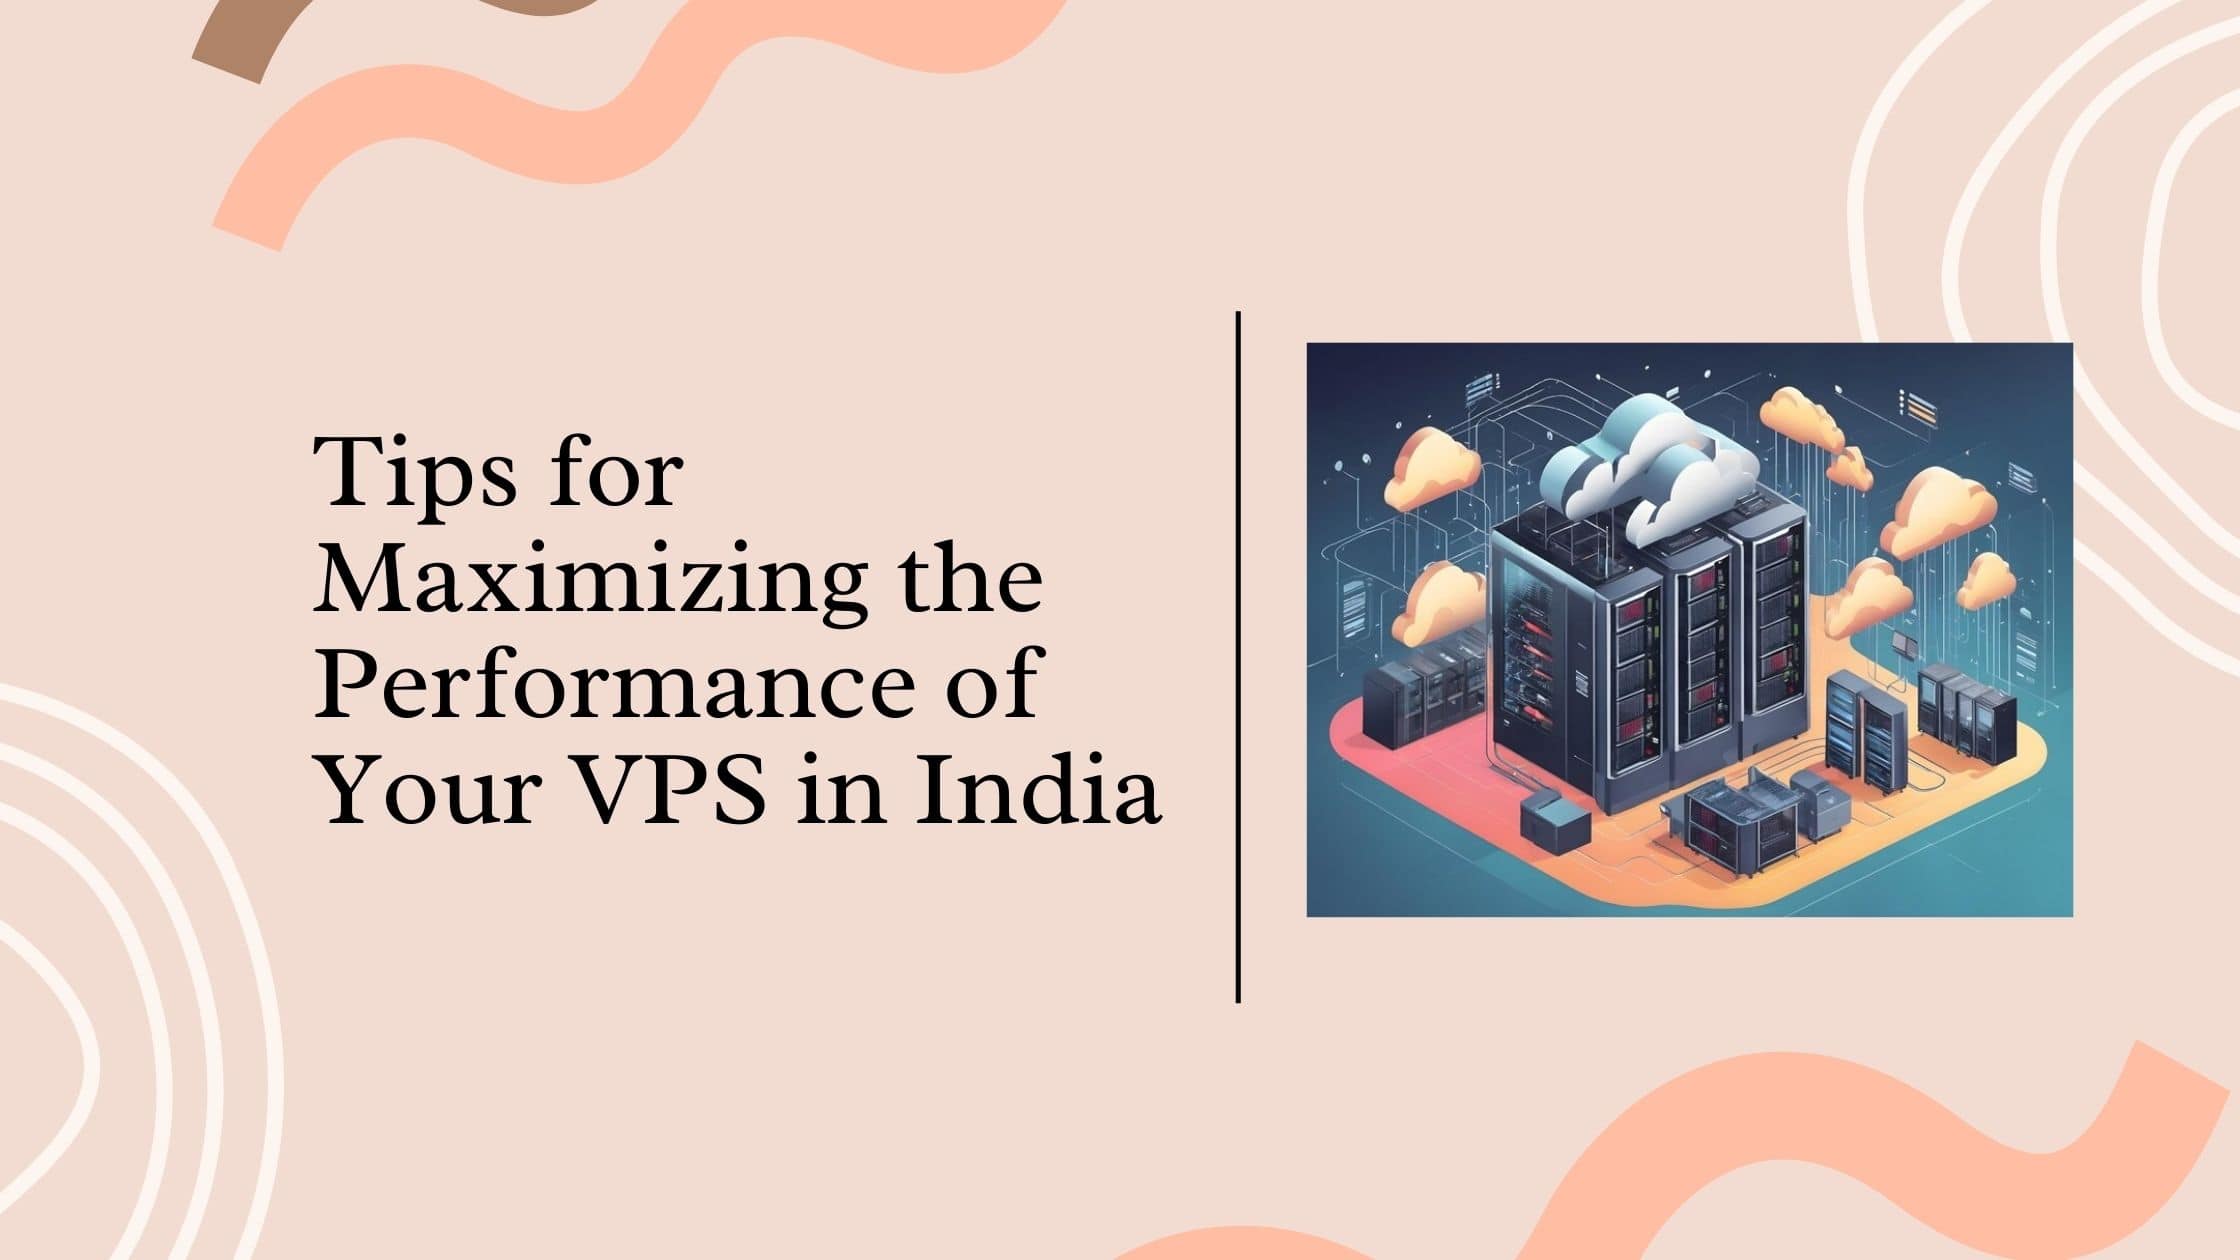 Tips for Maximizing the Performance of Your VPS in India